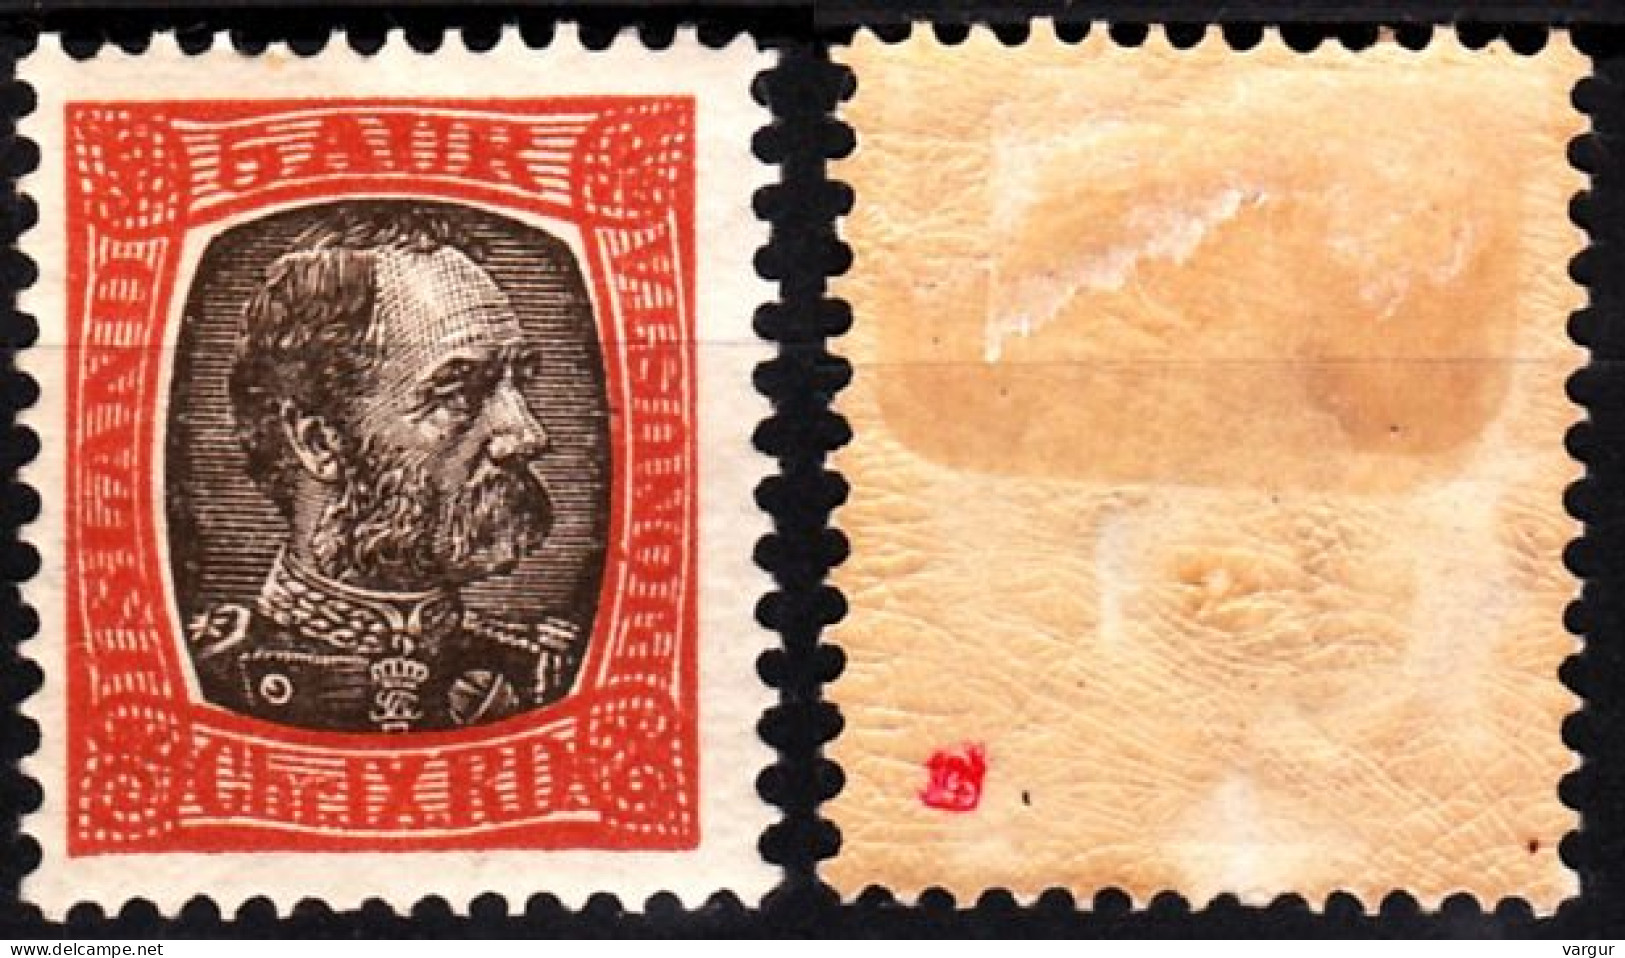 ICELAND / ISLAND Postage Due 1902 King Christian IX, 5Aur, MH Proved - Officials